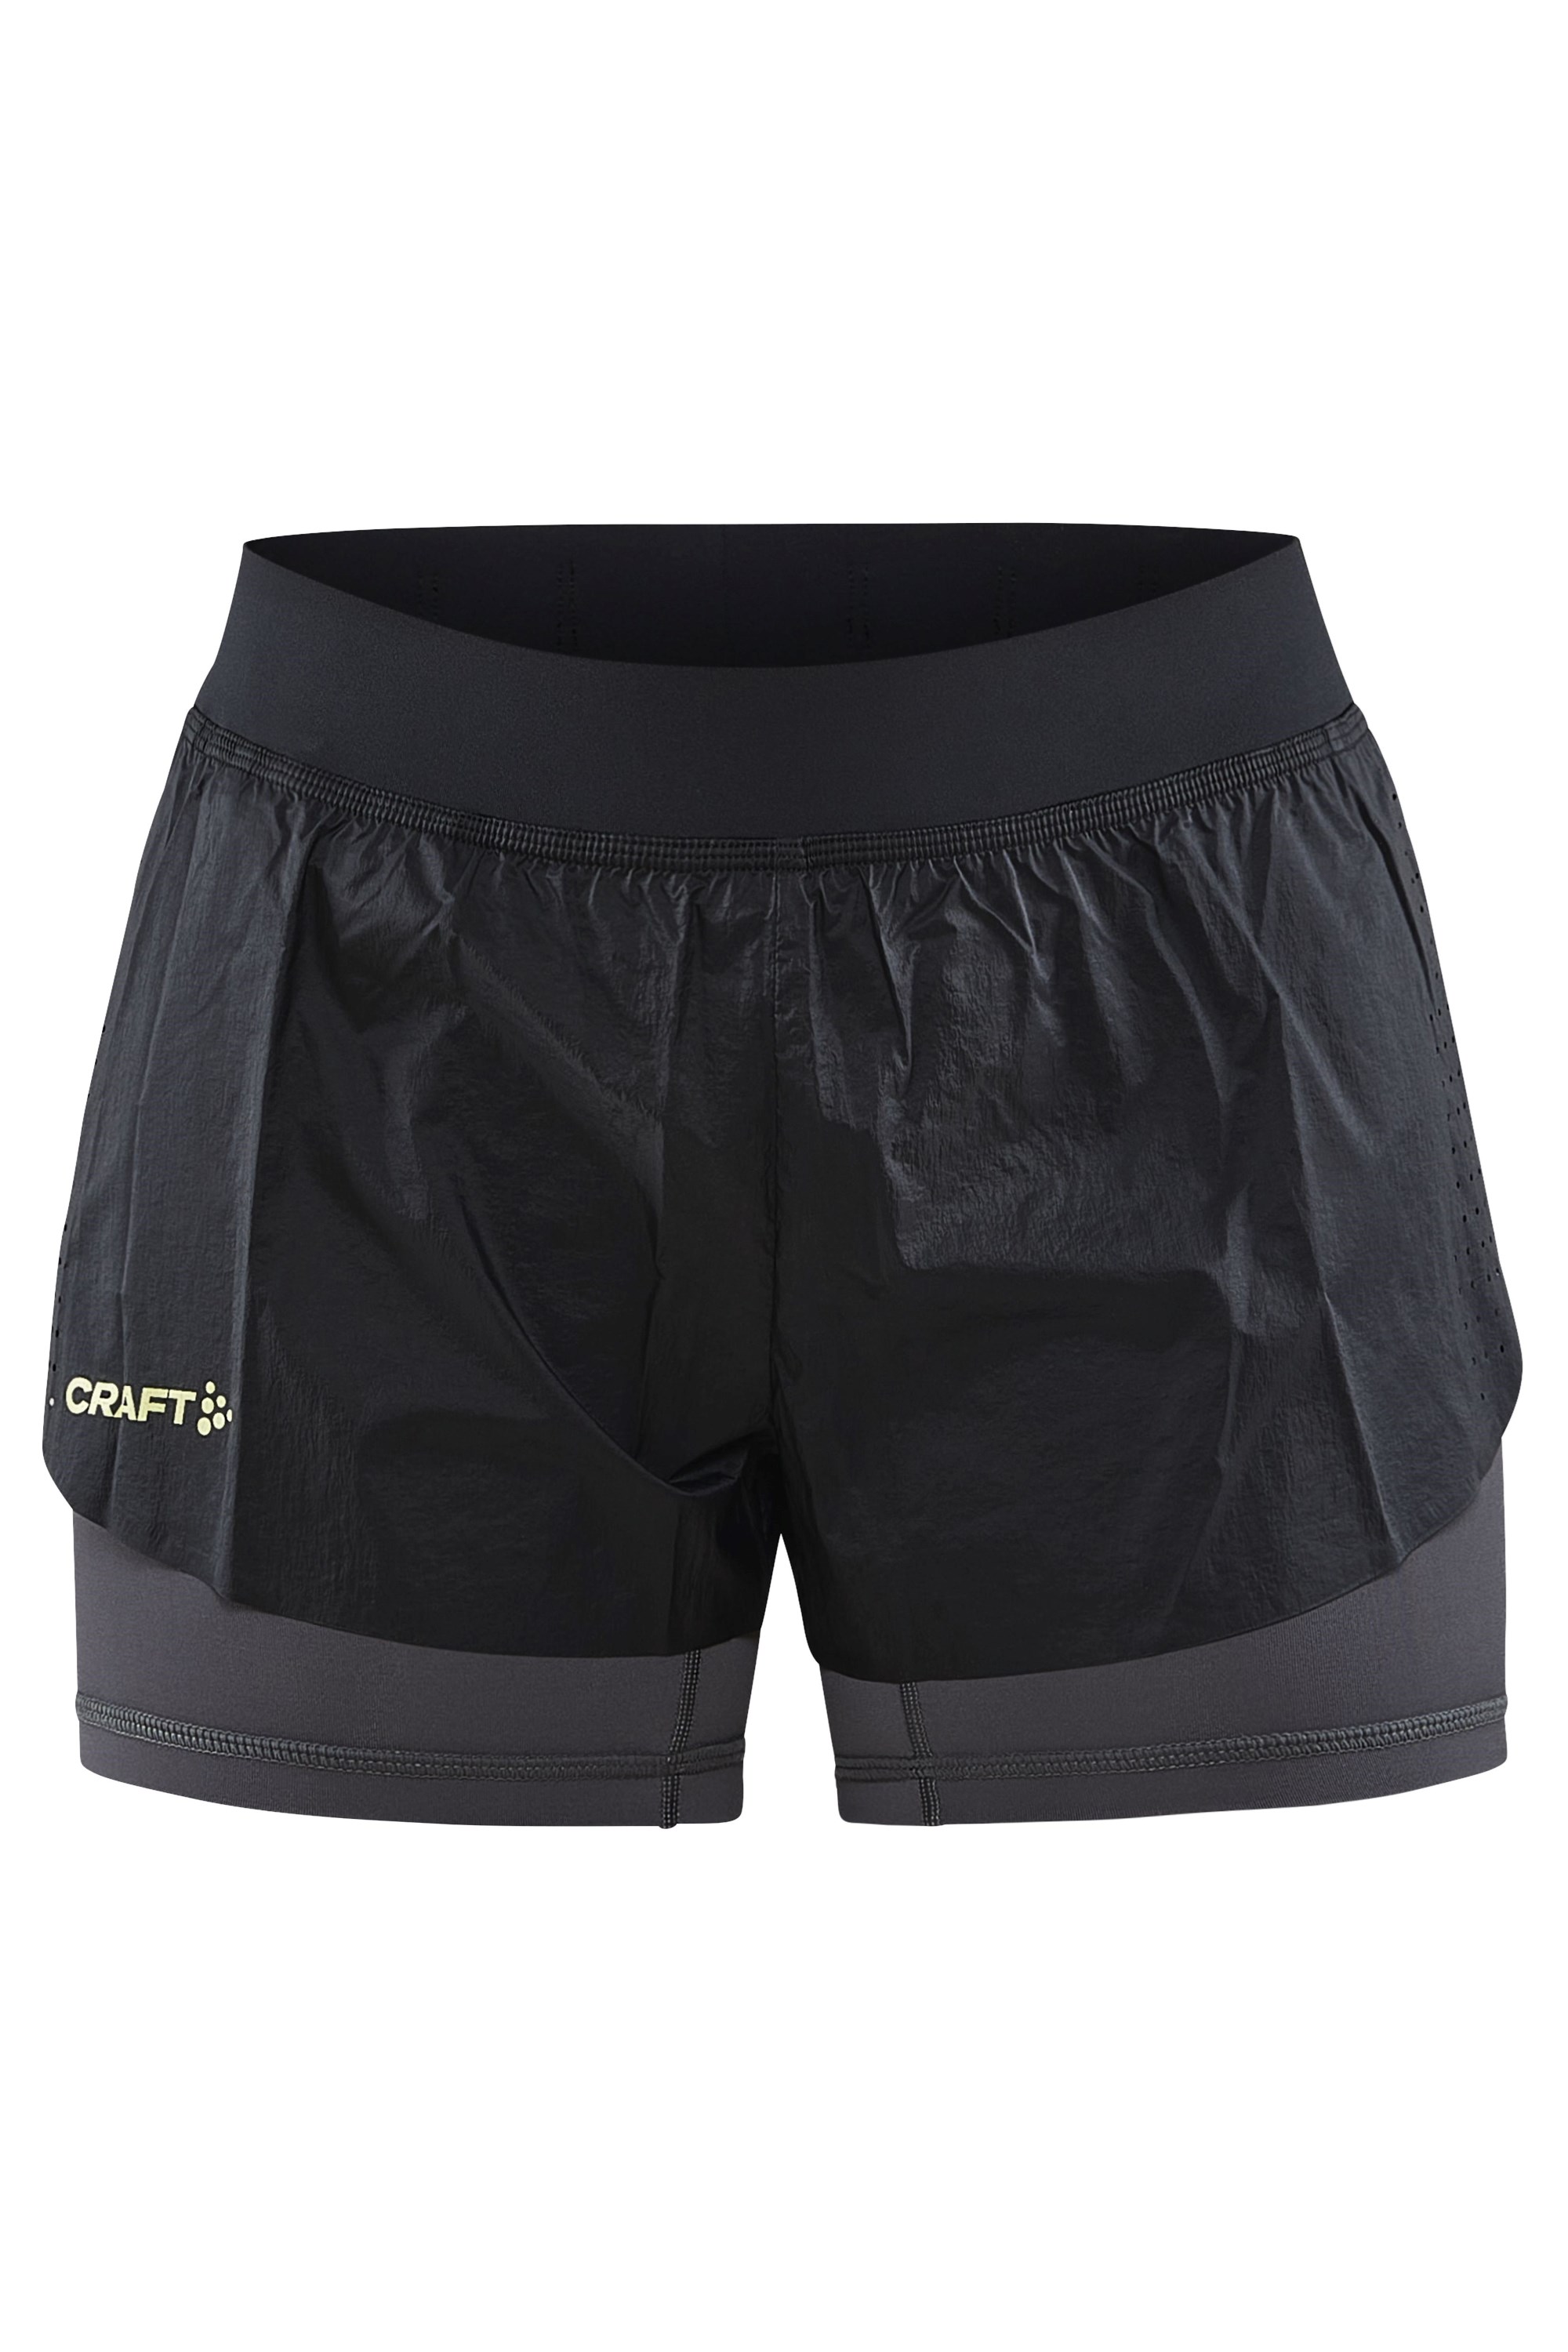 Ctm Distance Womens 2 In 1 Running Shorts -